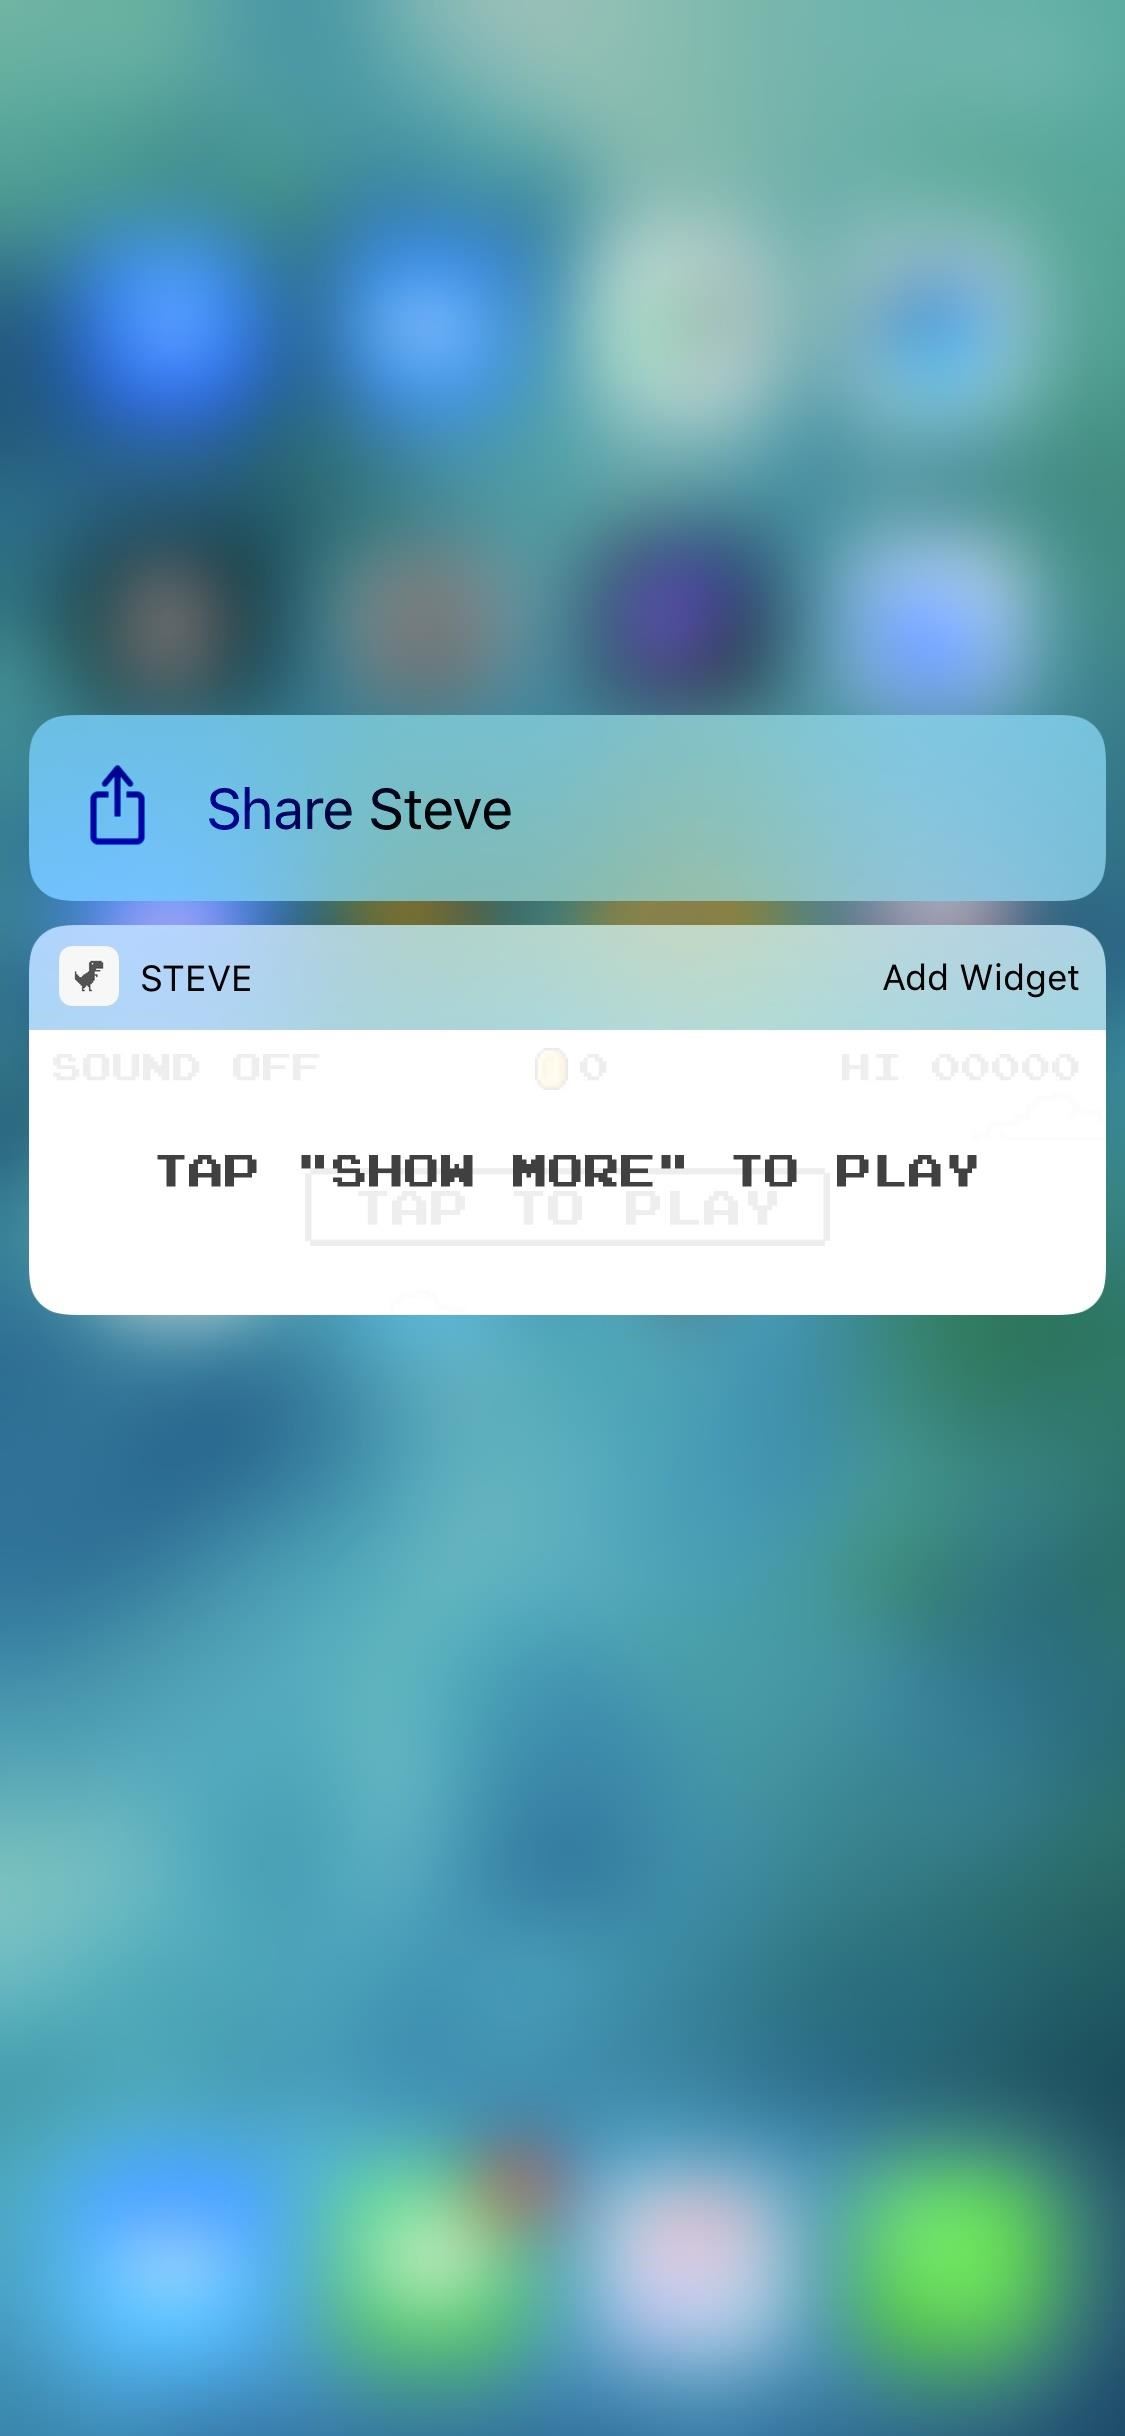 8 Games You Can Play Right from Your iPhone's Today View on the Lock Screen